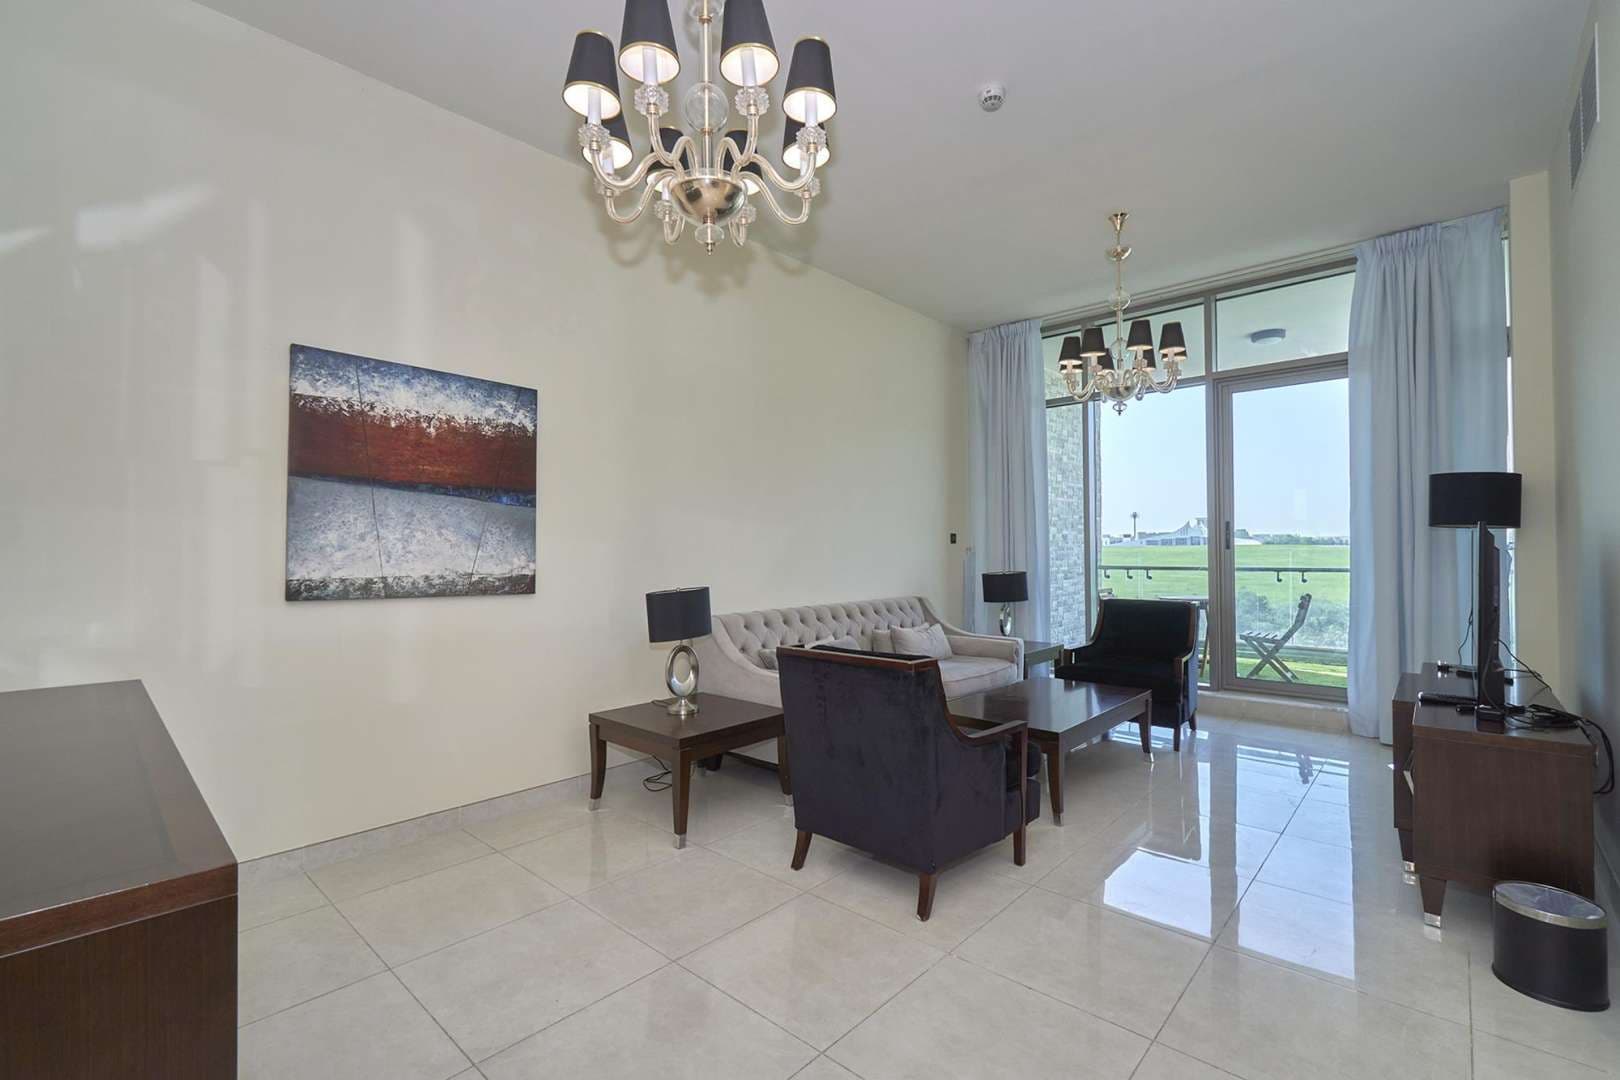 2 Bedroom Apartment For Rent The Polo Residence Lp06547 233bd13edf609200.jpg